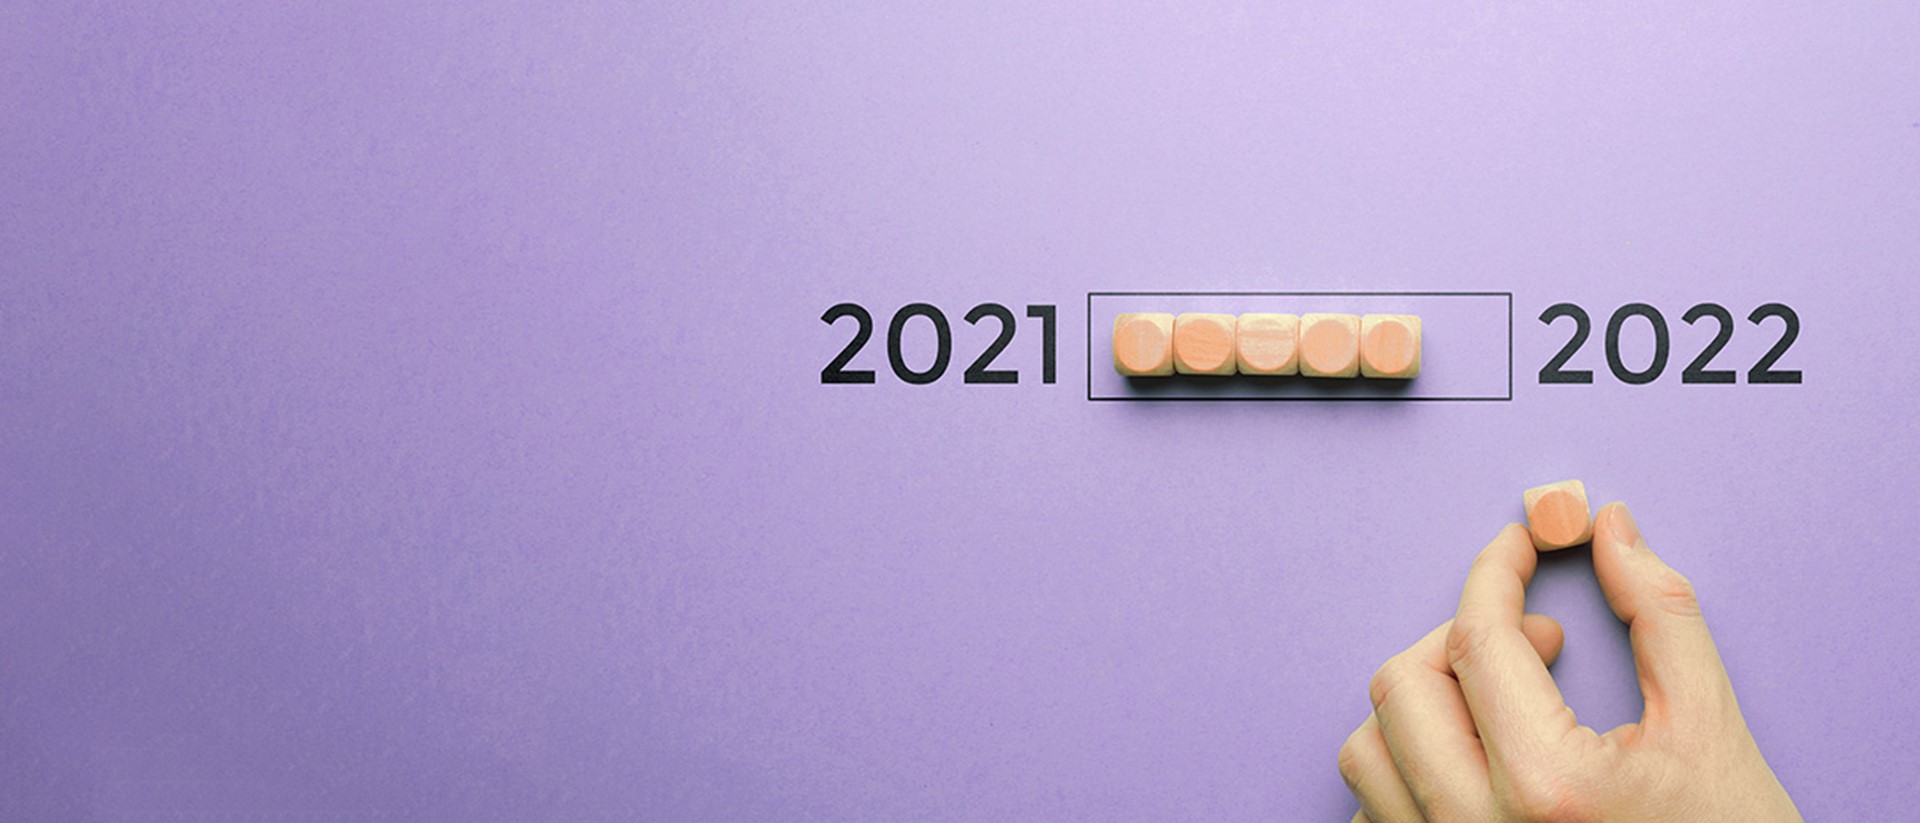 Image wooden blocks being moved from 2021 to 2022 on a purple background